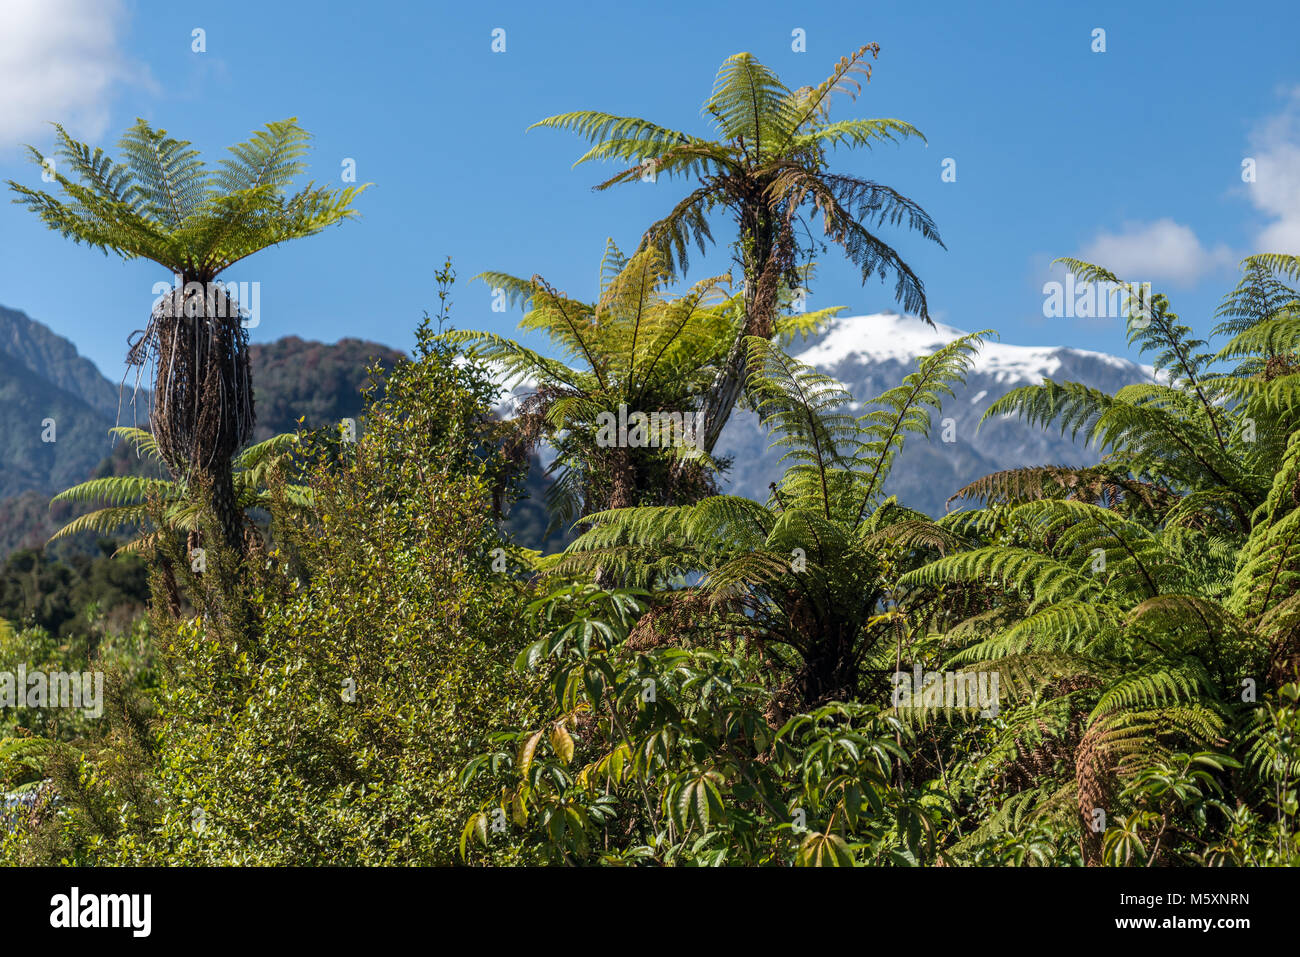 Jungle and Palms in front of Glacier Mountain, New Zealand Stock Photo